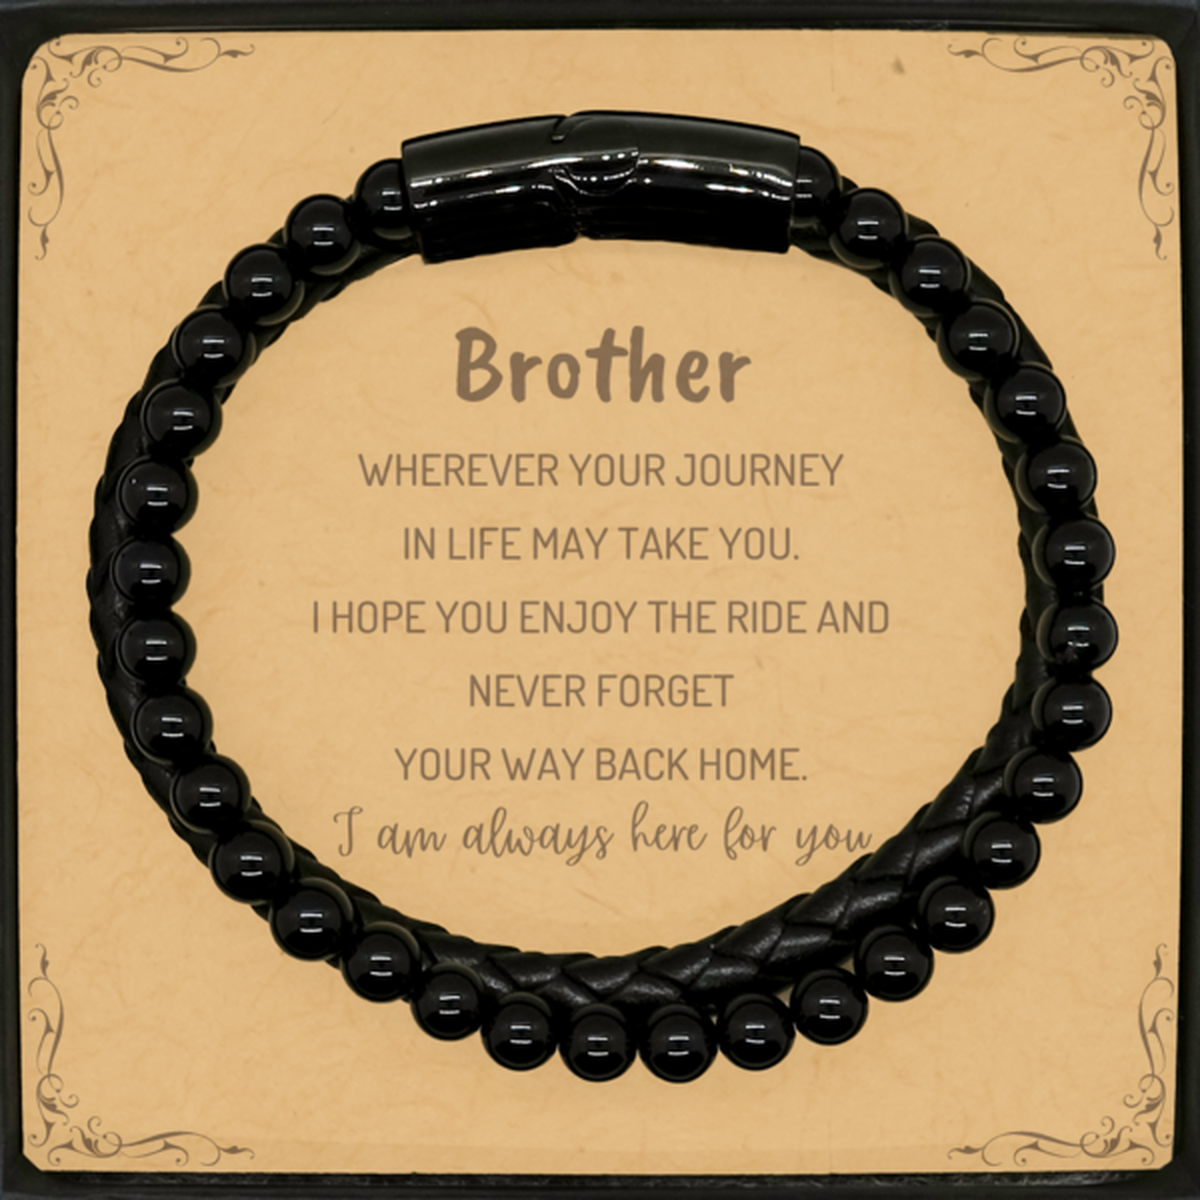 Brother wherever your journey in life may take you, I am always here for you Brother Stone Leather Bracelets, Awesome Christmas Gifts For Brother Message Card, Brother Birthday Gifts for Men Women Family Loved One